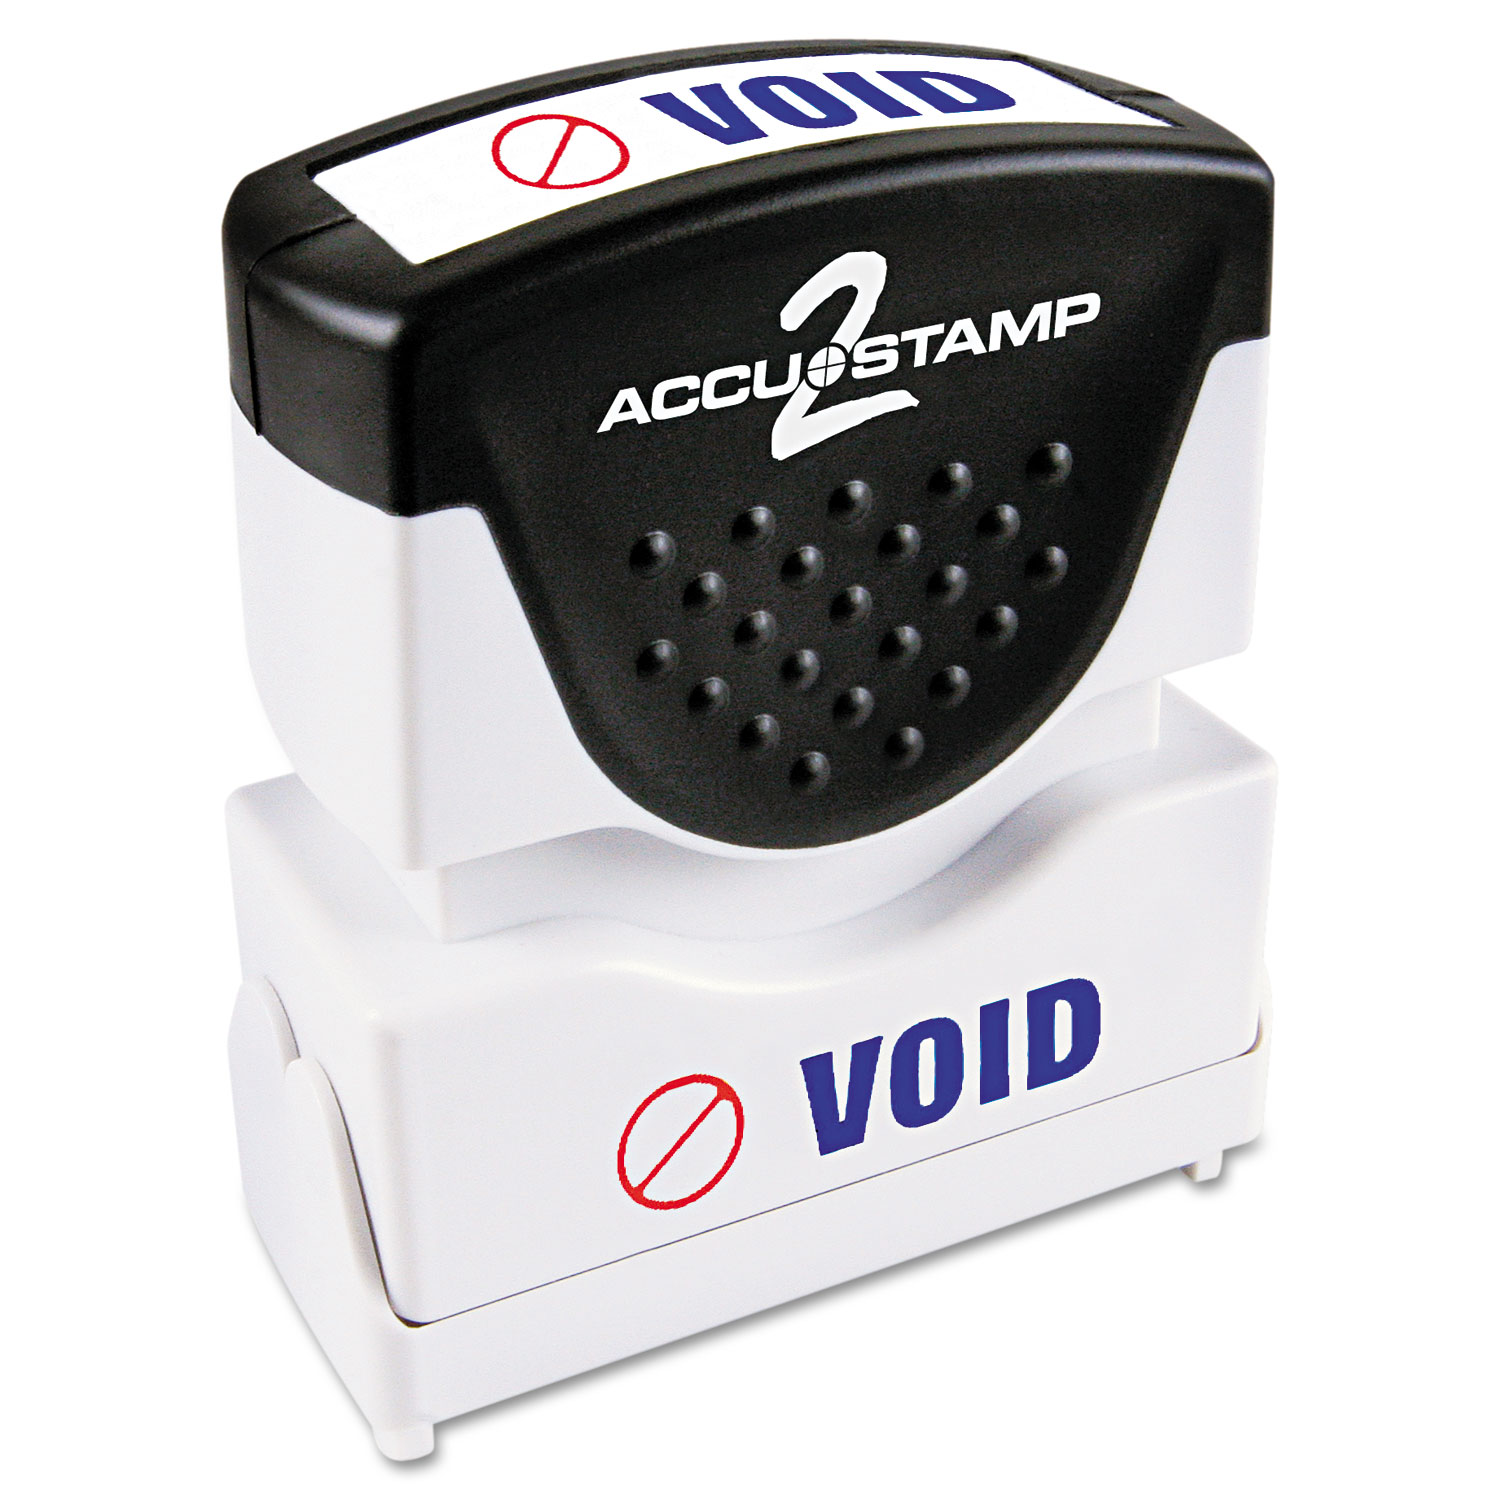  ACCUSTAMP2 035539 Pre-Inked Shutter Stamp, Red/Blue, VOID, 1 5/8 x 1/2 (COS035539) 